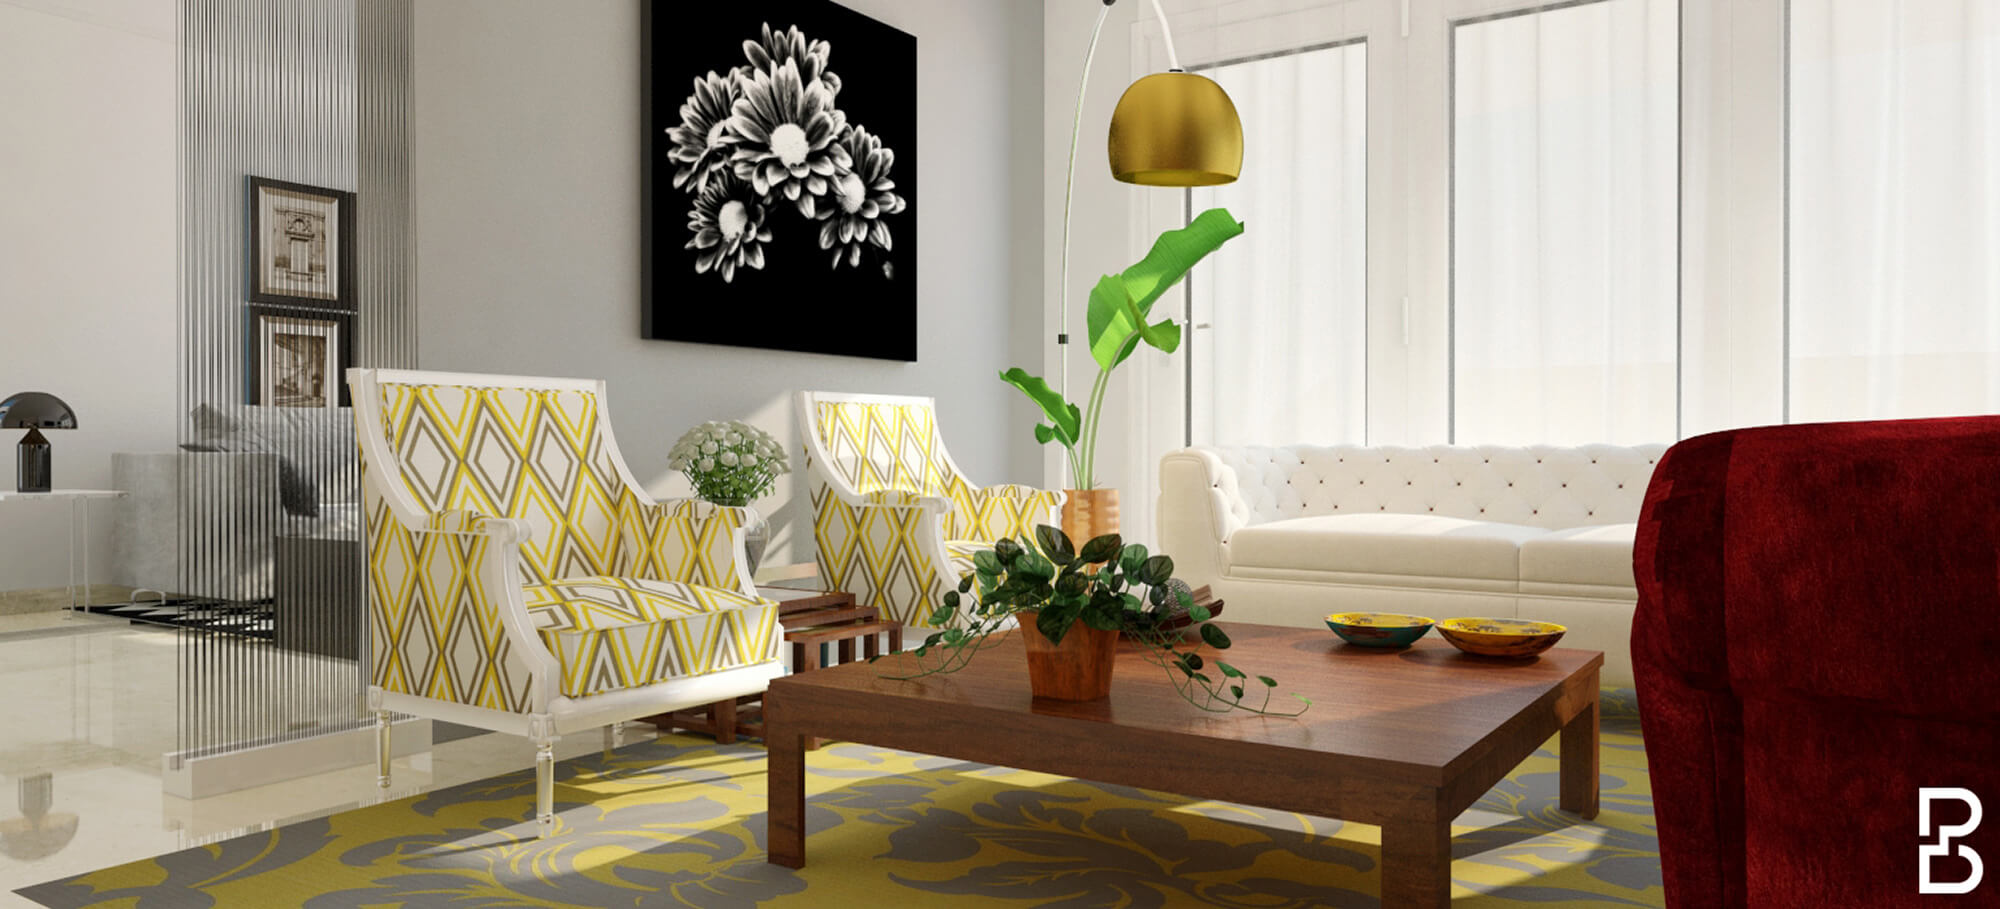 Living Room Furniture Designs, Concepts & Ideas to Set Up